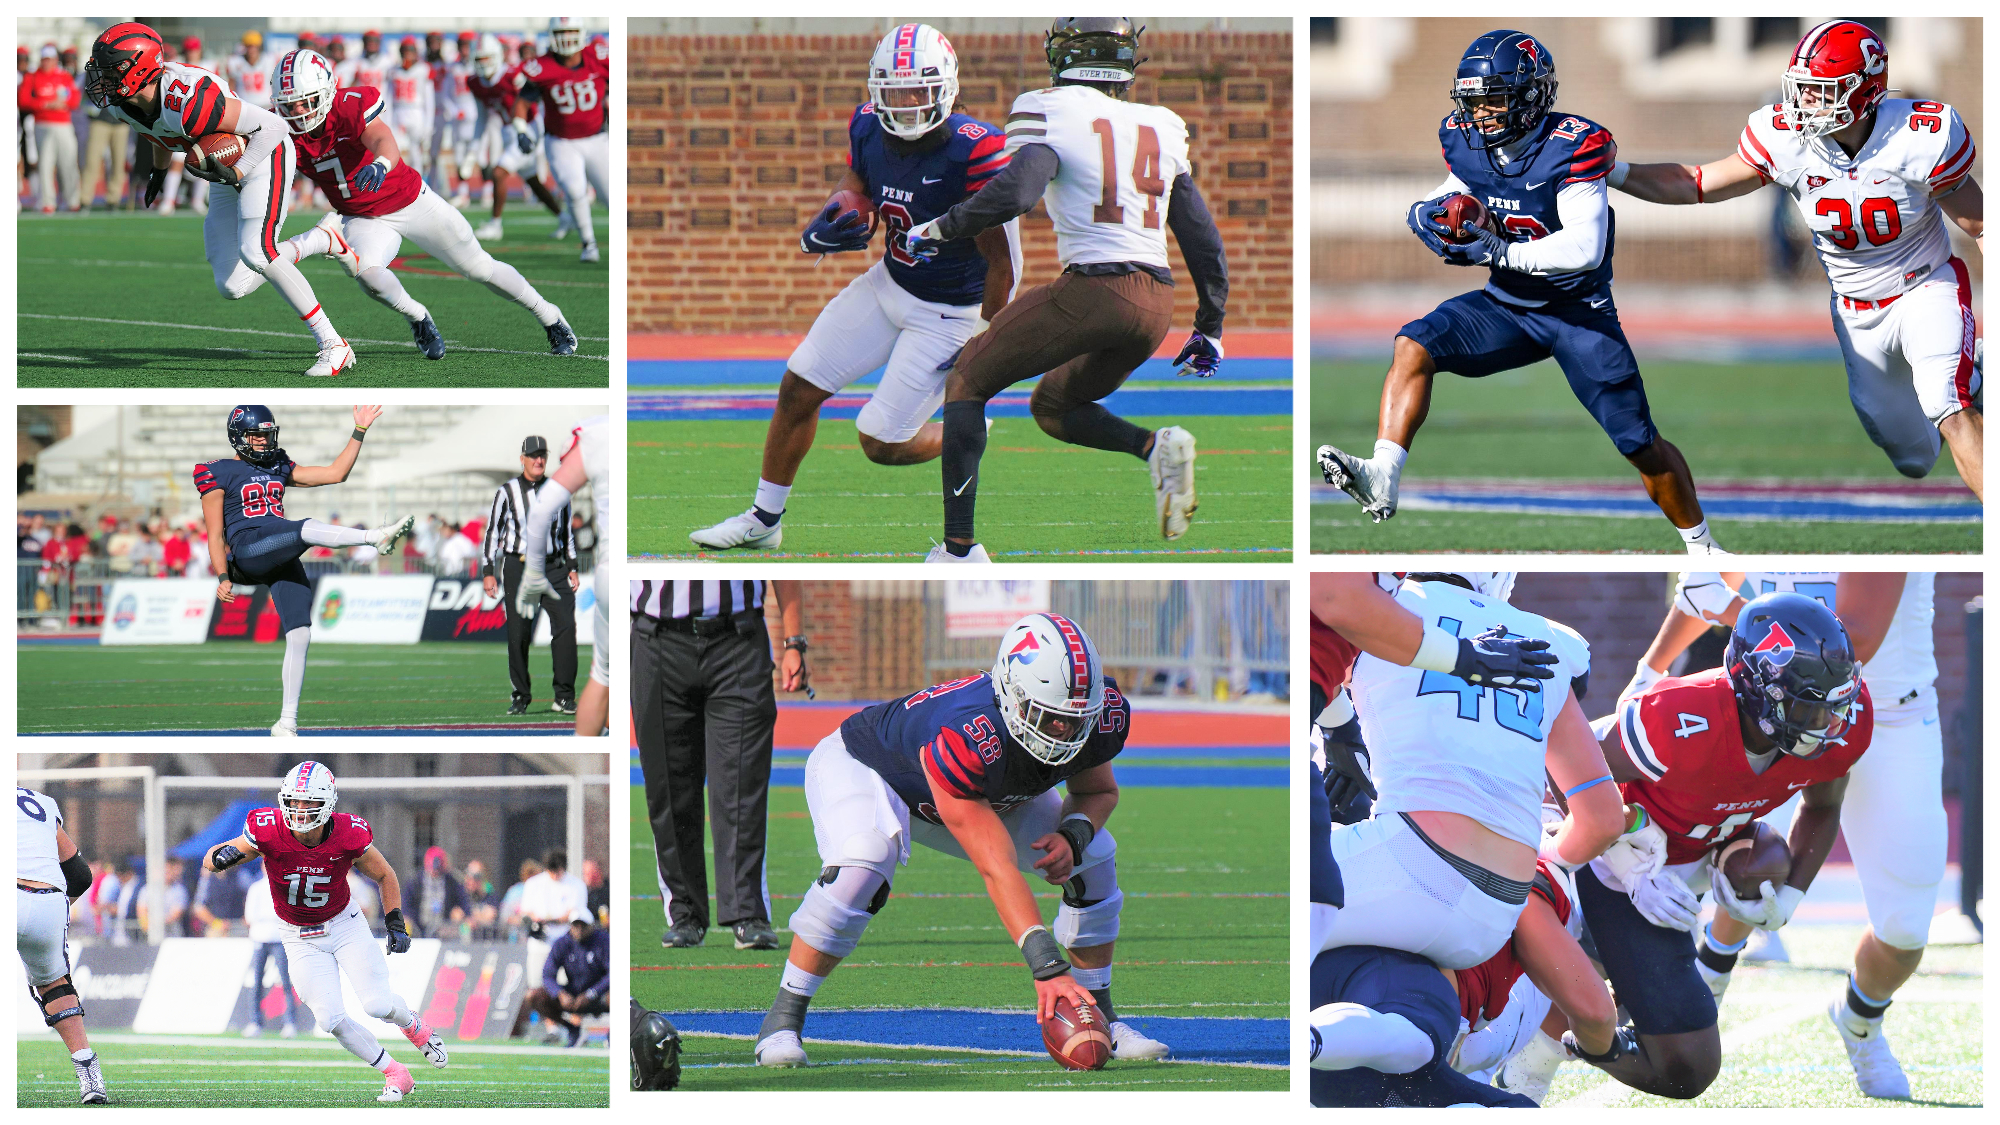 Grid shows various football players in action during the season.